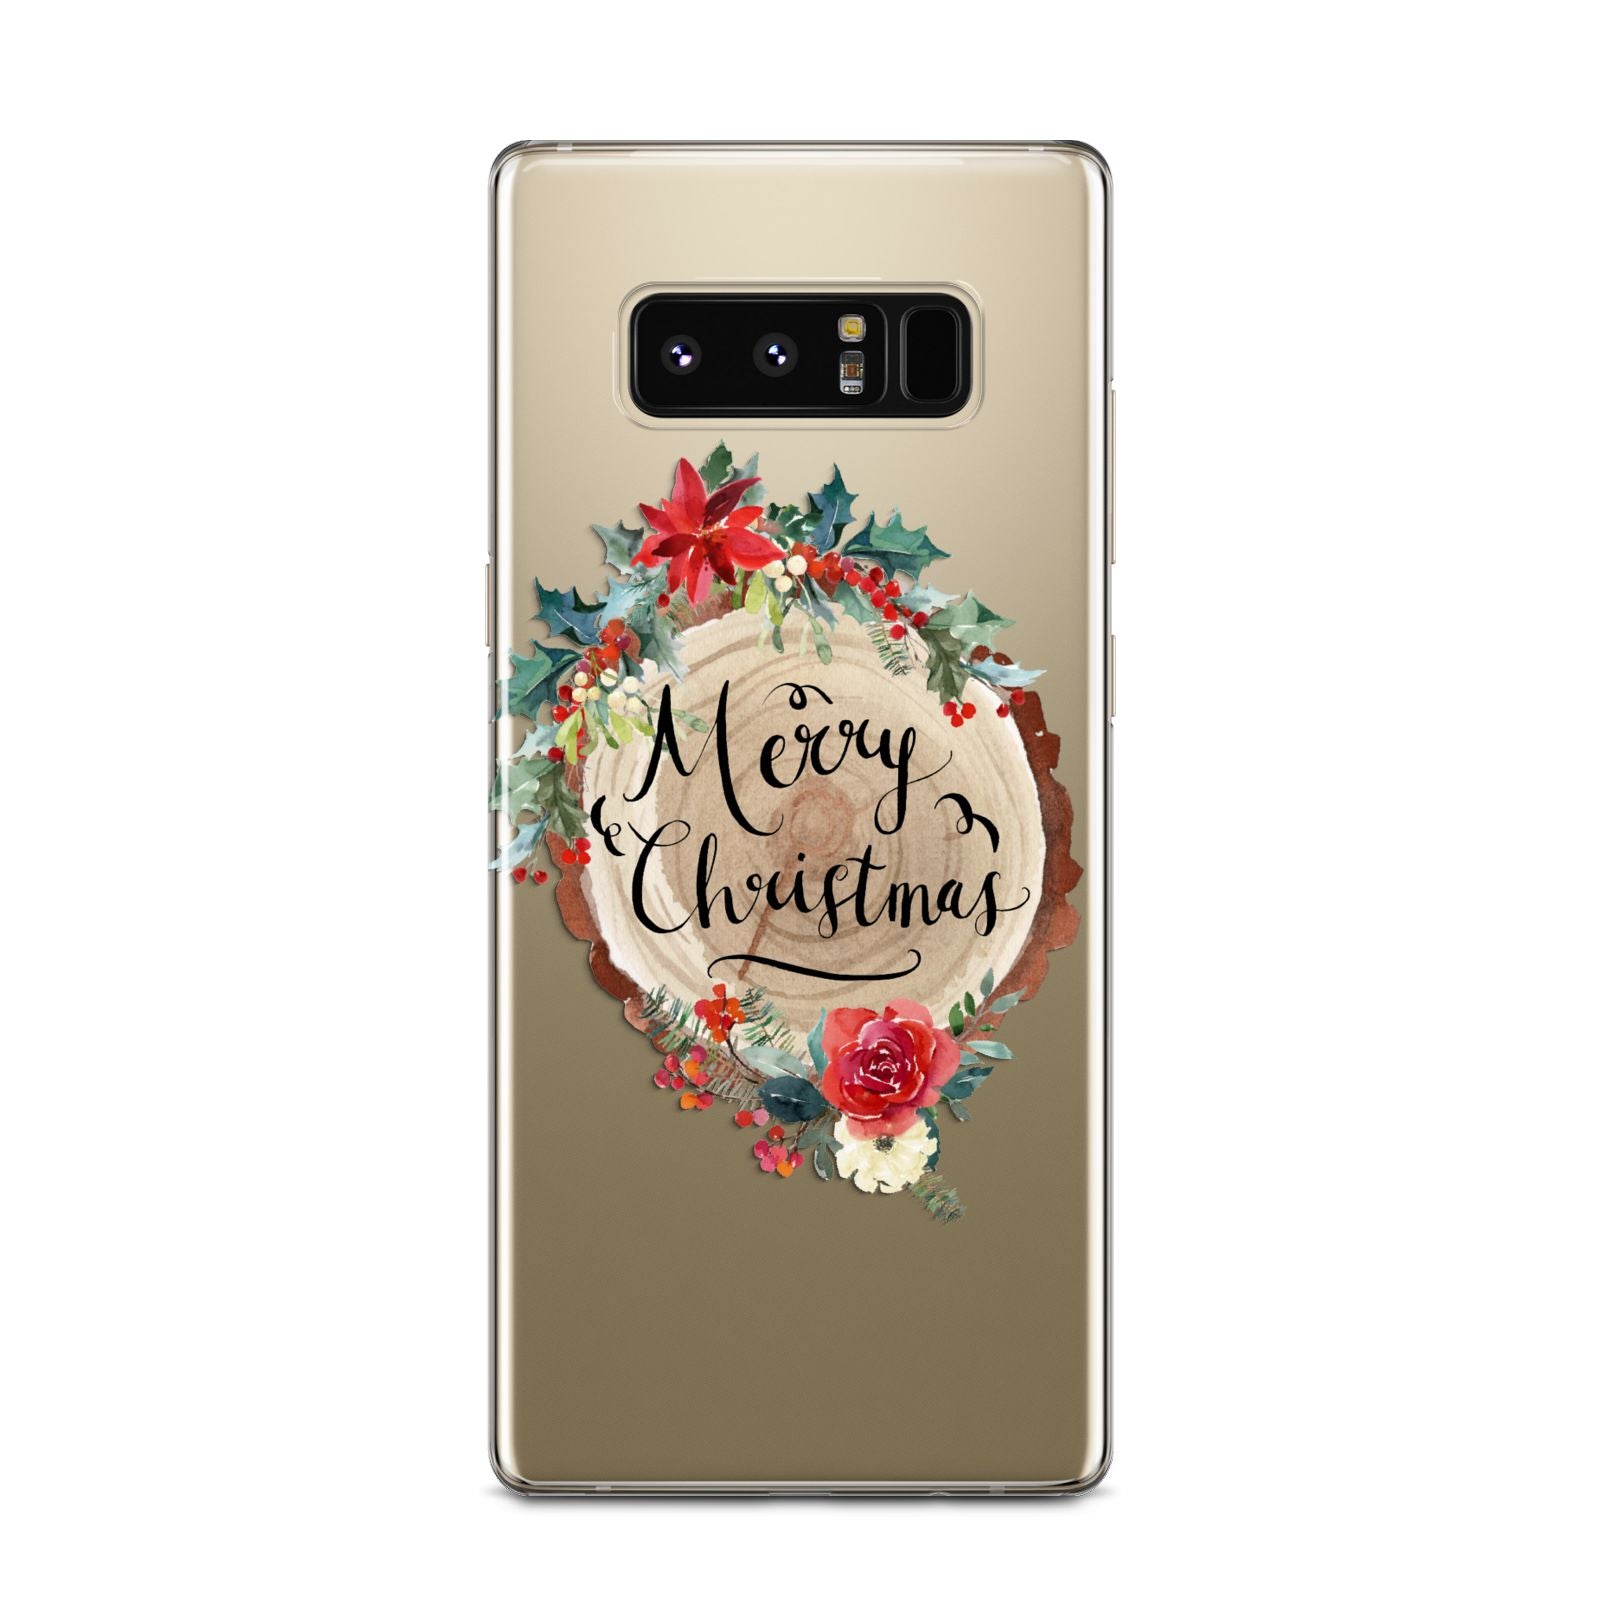 Merry Christmas Log Floral Samsung Galaxy Note 8 Case